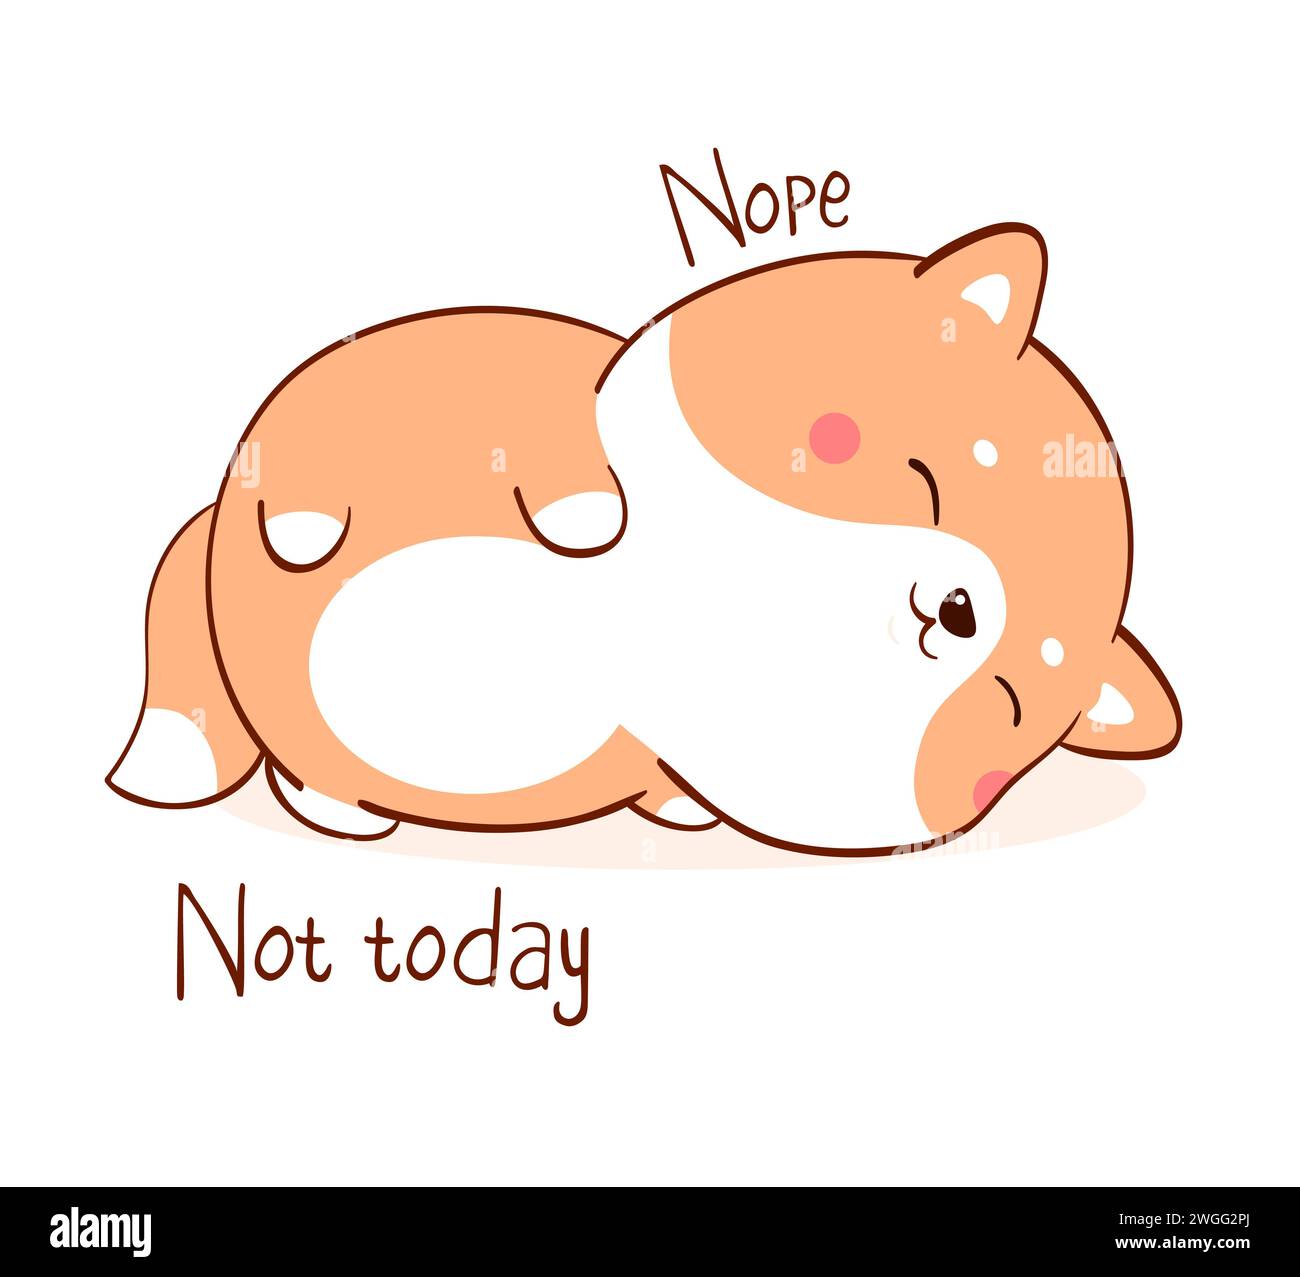 Square card with a lying lazy dog and inscription Nope Not today. Funny sleeping fat shiba inu puppy in kawaii style. Vector illustration EPS8 Stock Photo